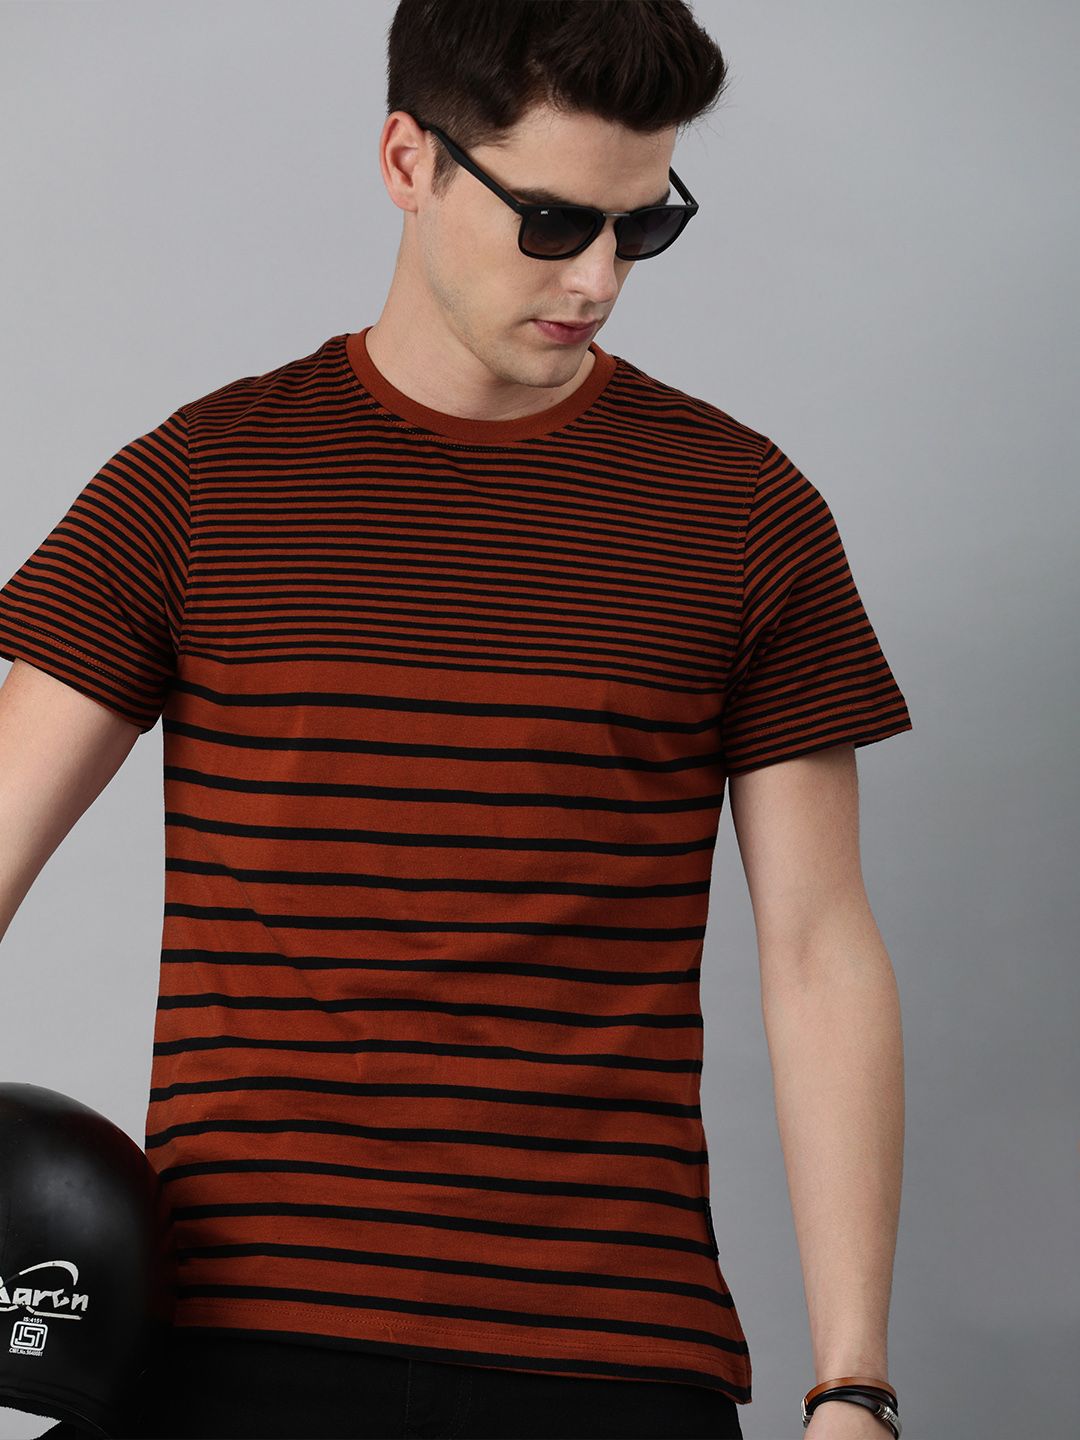 The Roadster Lifestyle Co Men Red Black Striped Pure Cotton T-shirt